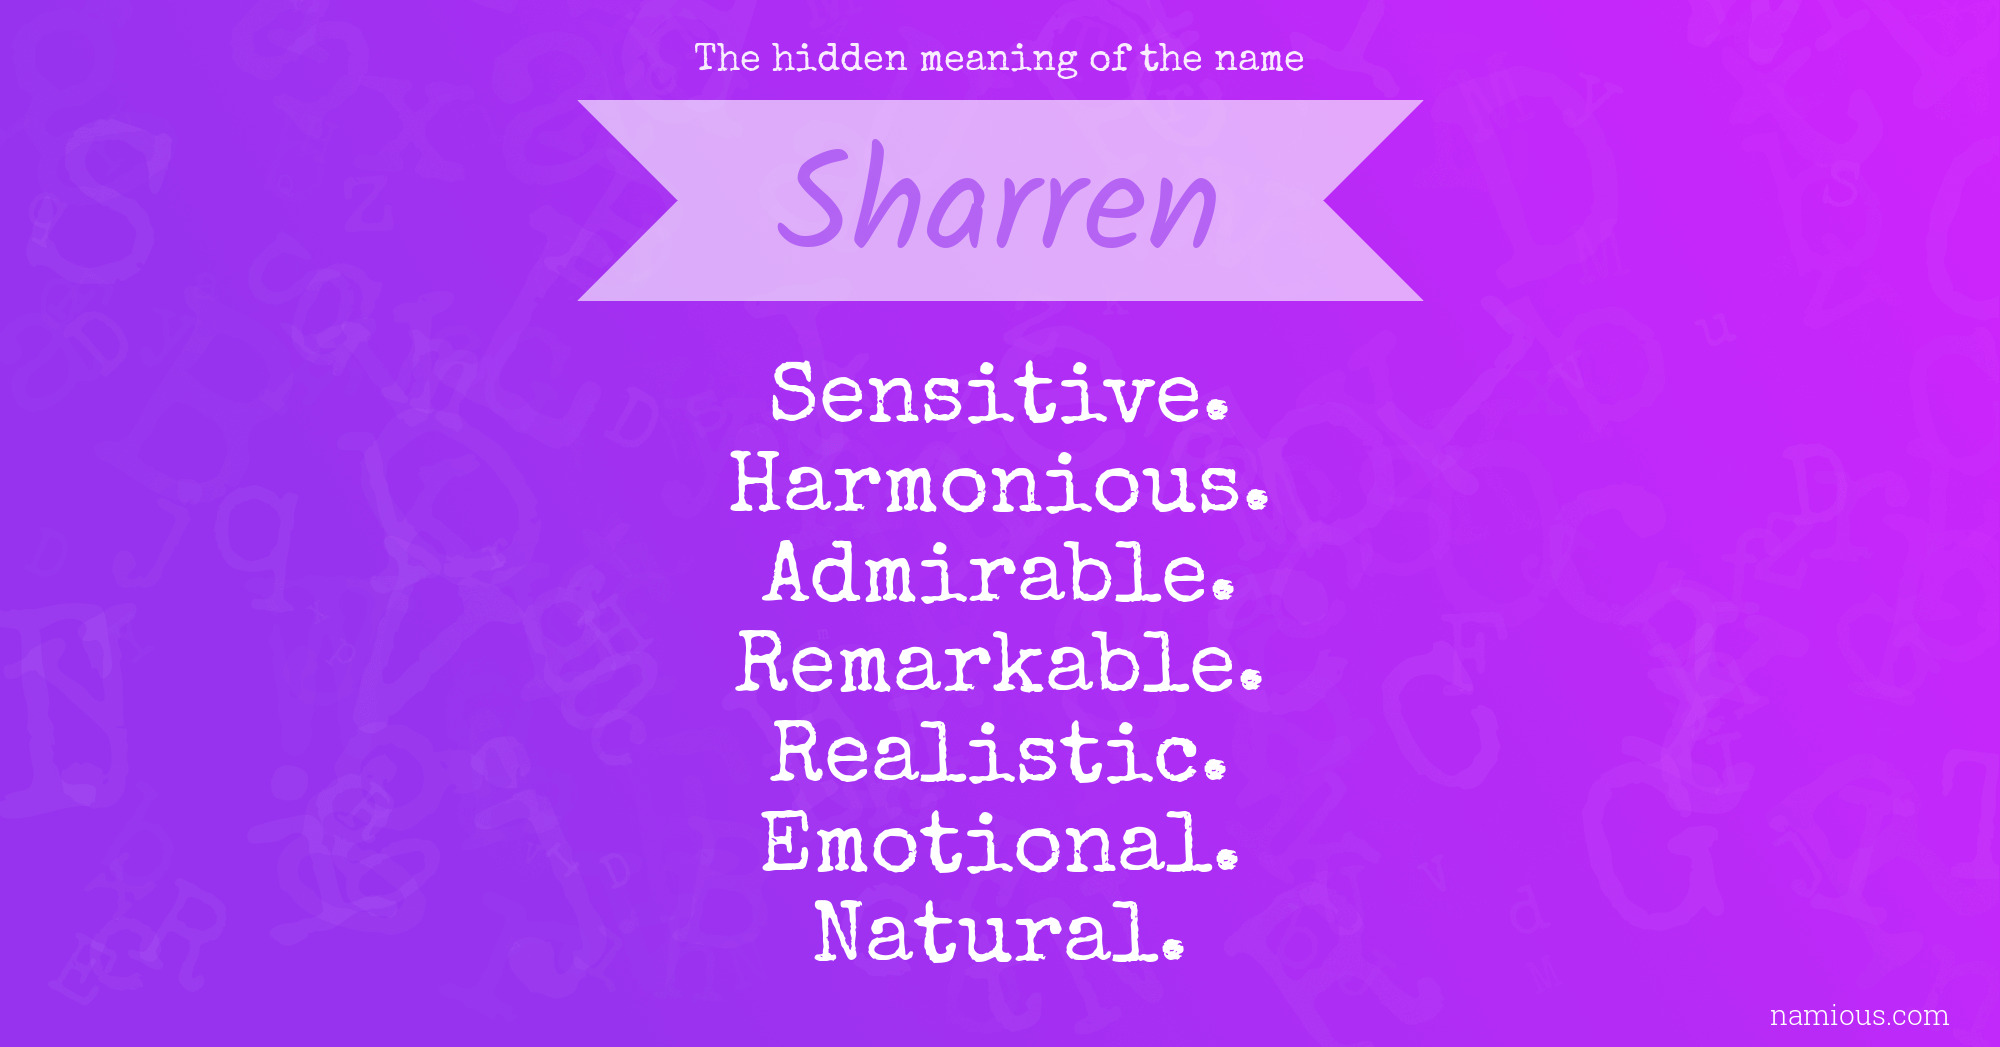 The hidden meaning of the name Sharren